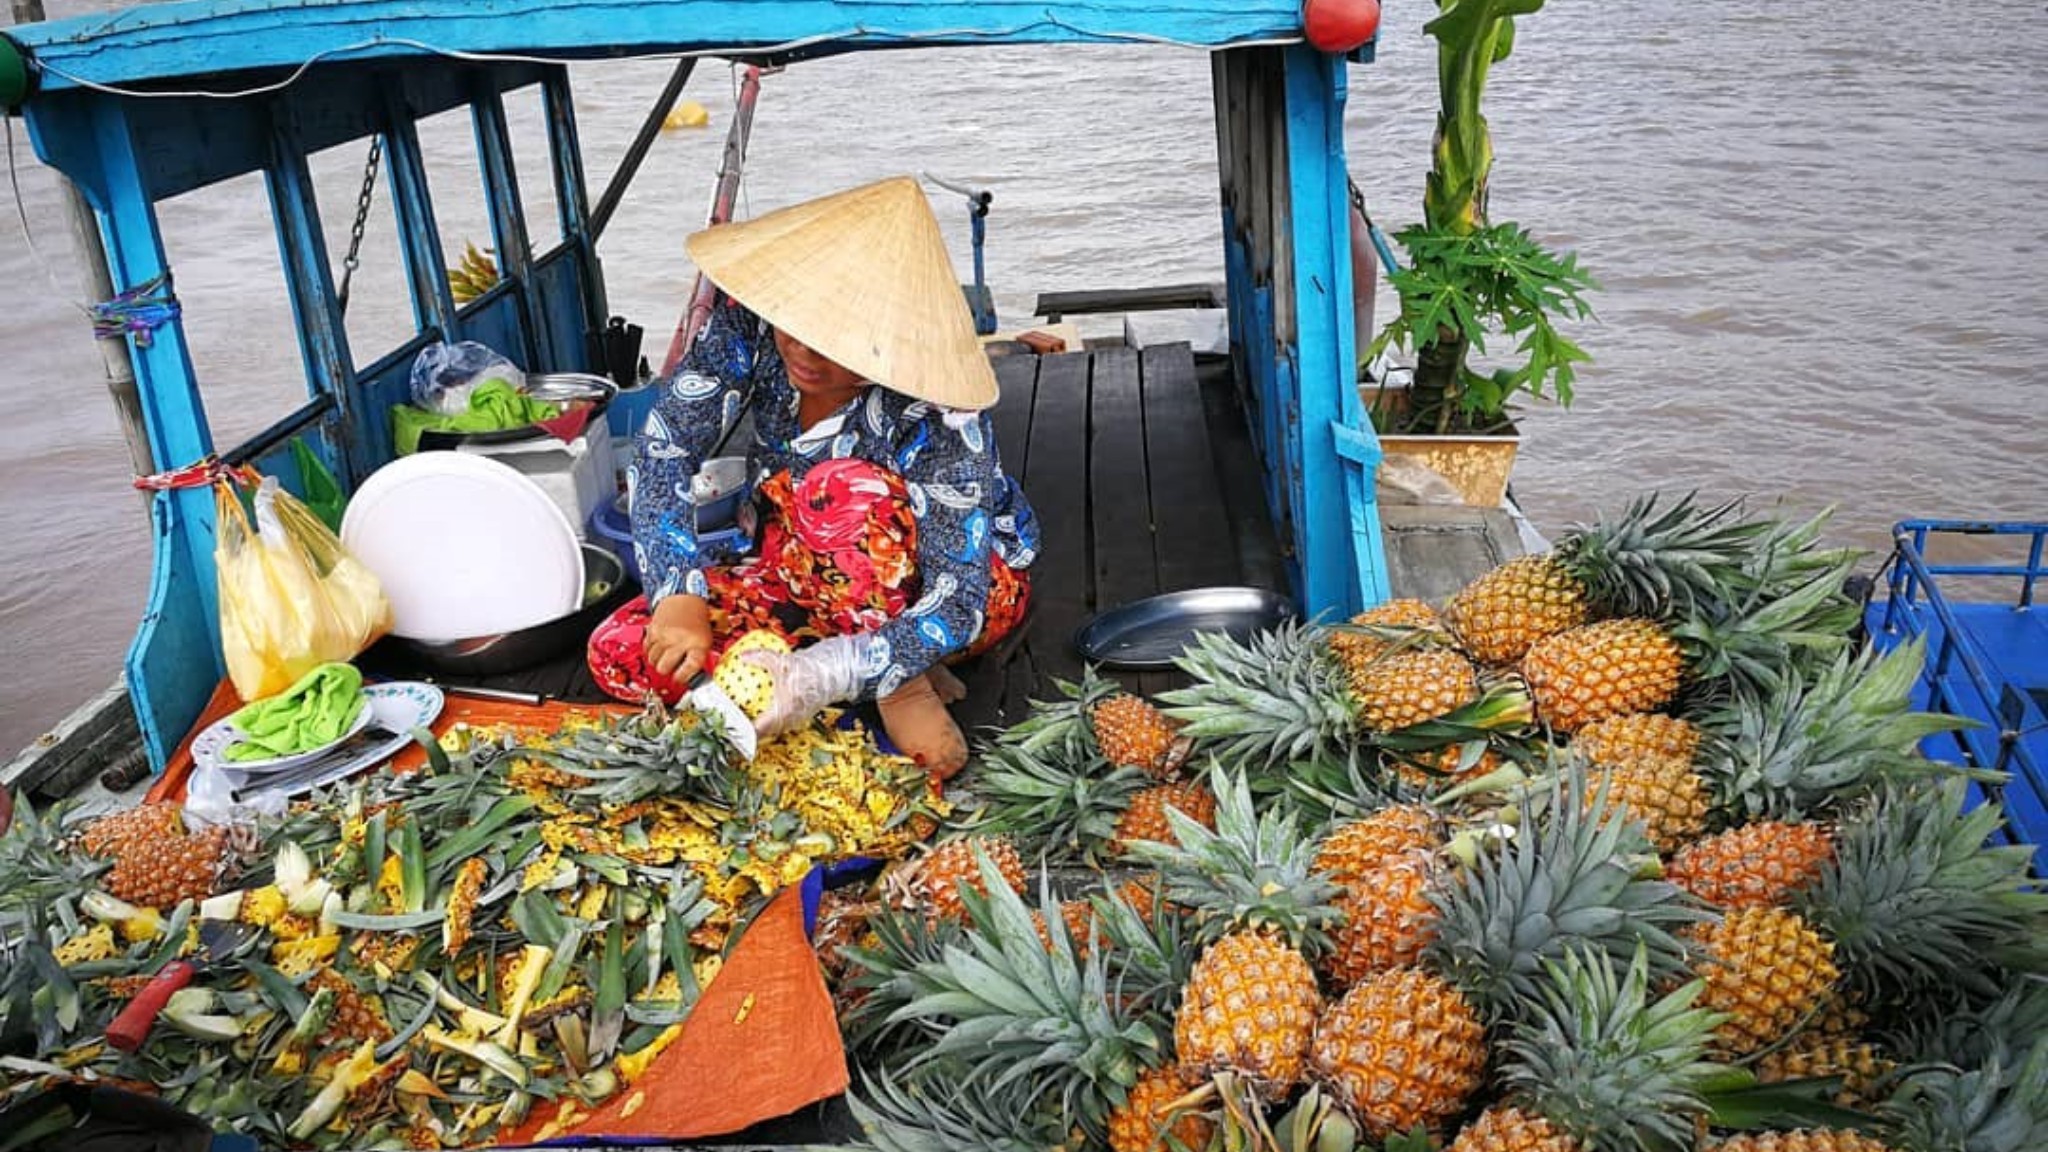 Day 13 Witness The Trading Life Of The Local In Cai Rang Floating Market